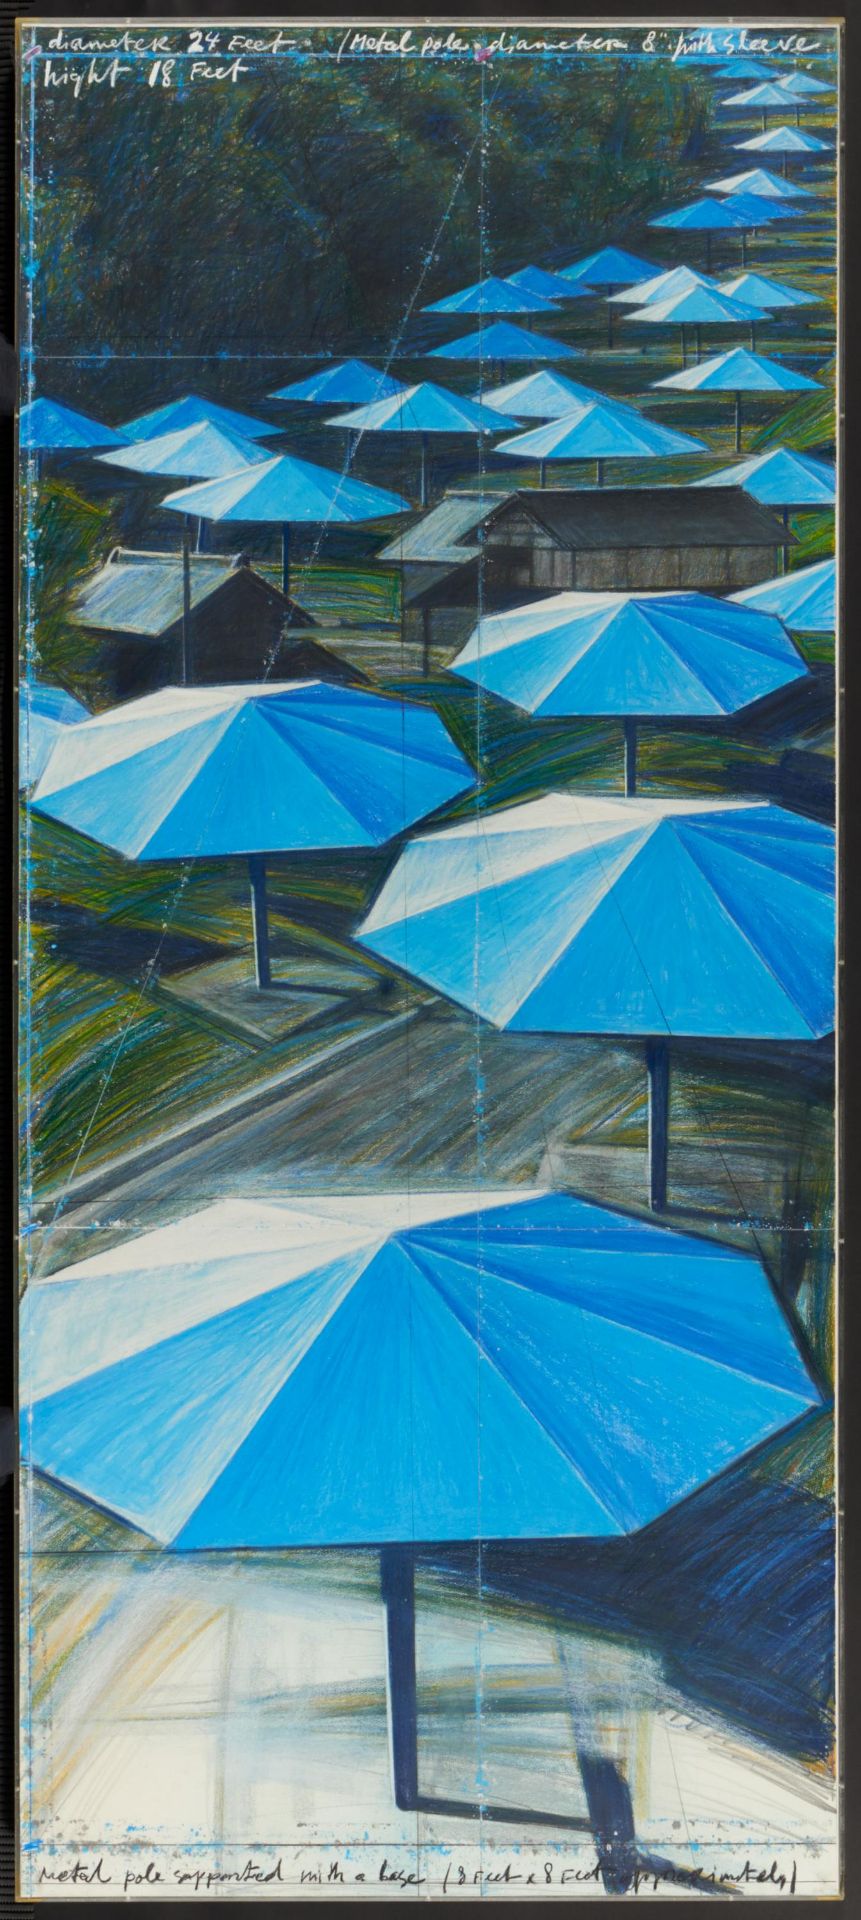 Christo: The Umbrellas (Joint Project for Japan and USA) - Image 6 of 8